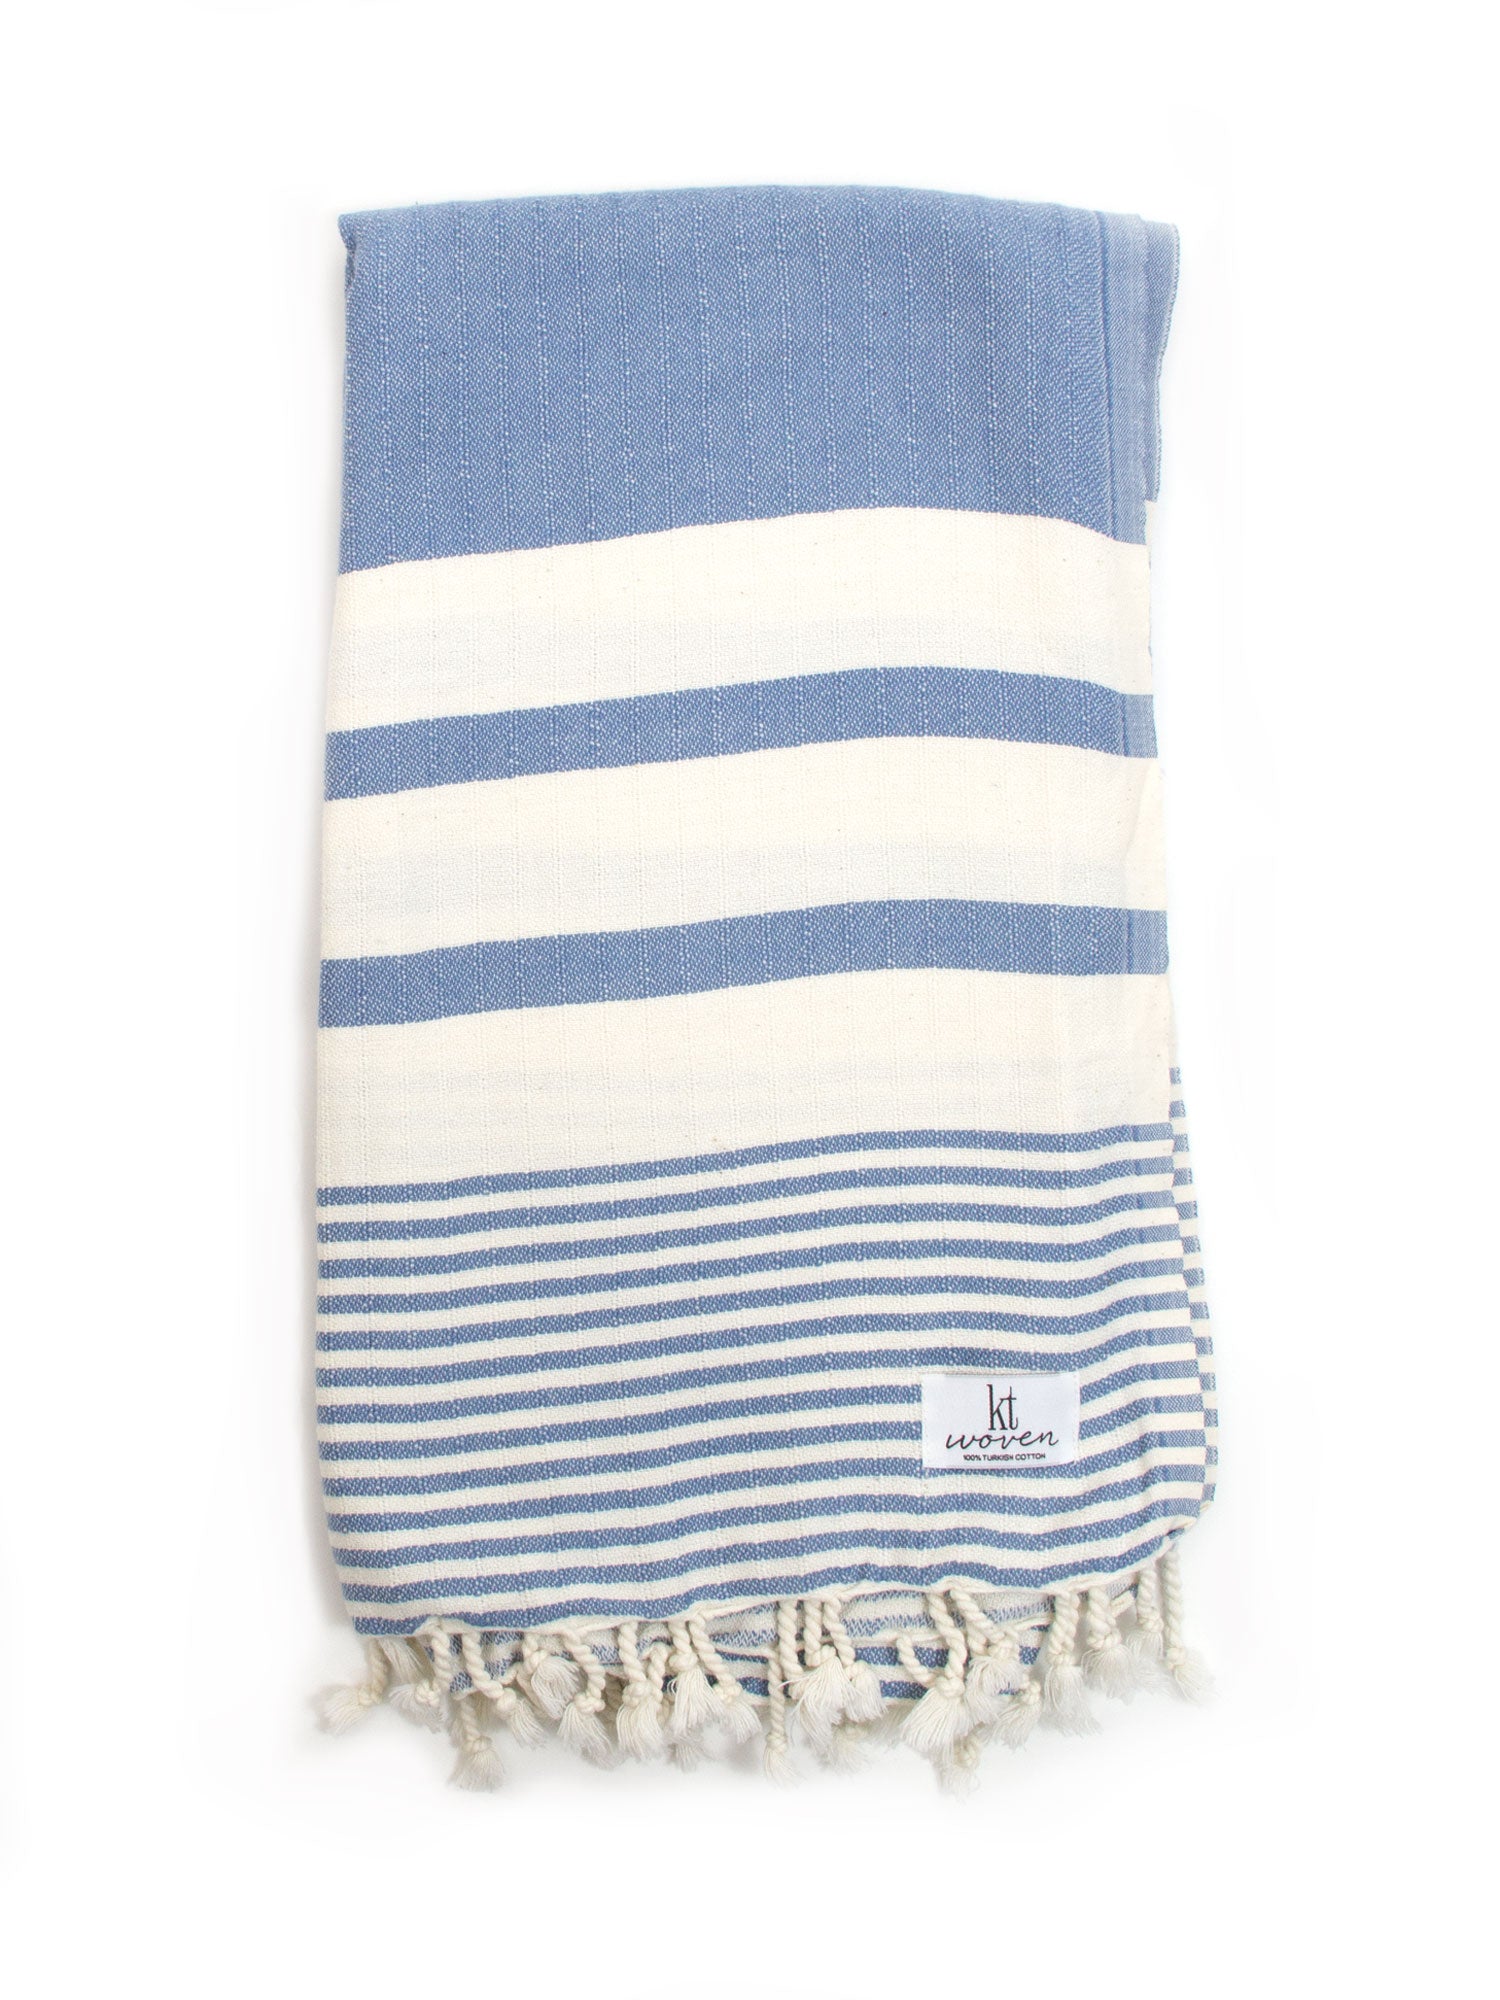 All the Stripes Towel